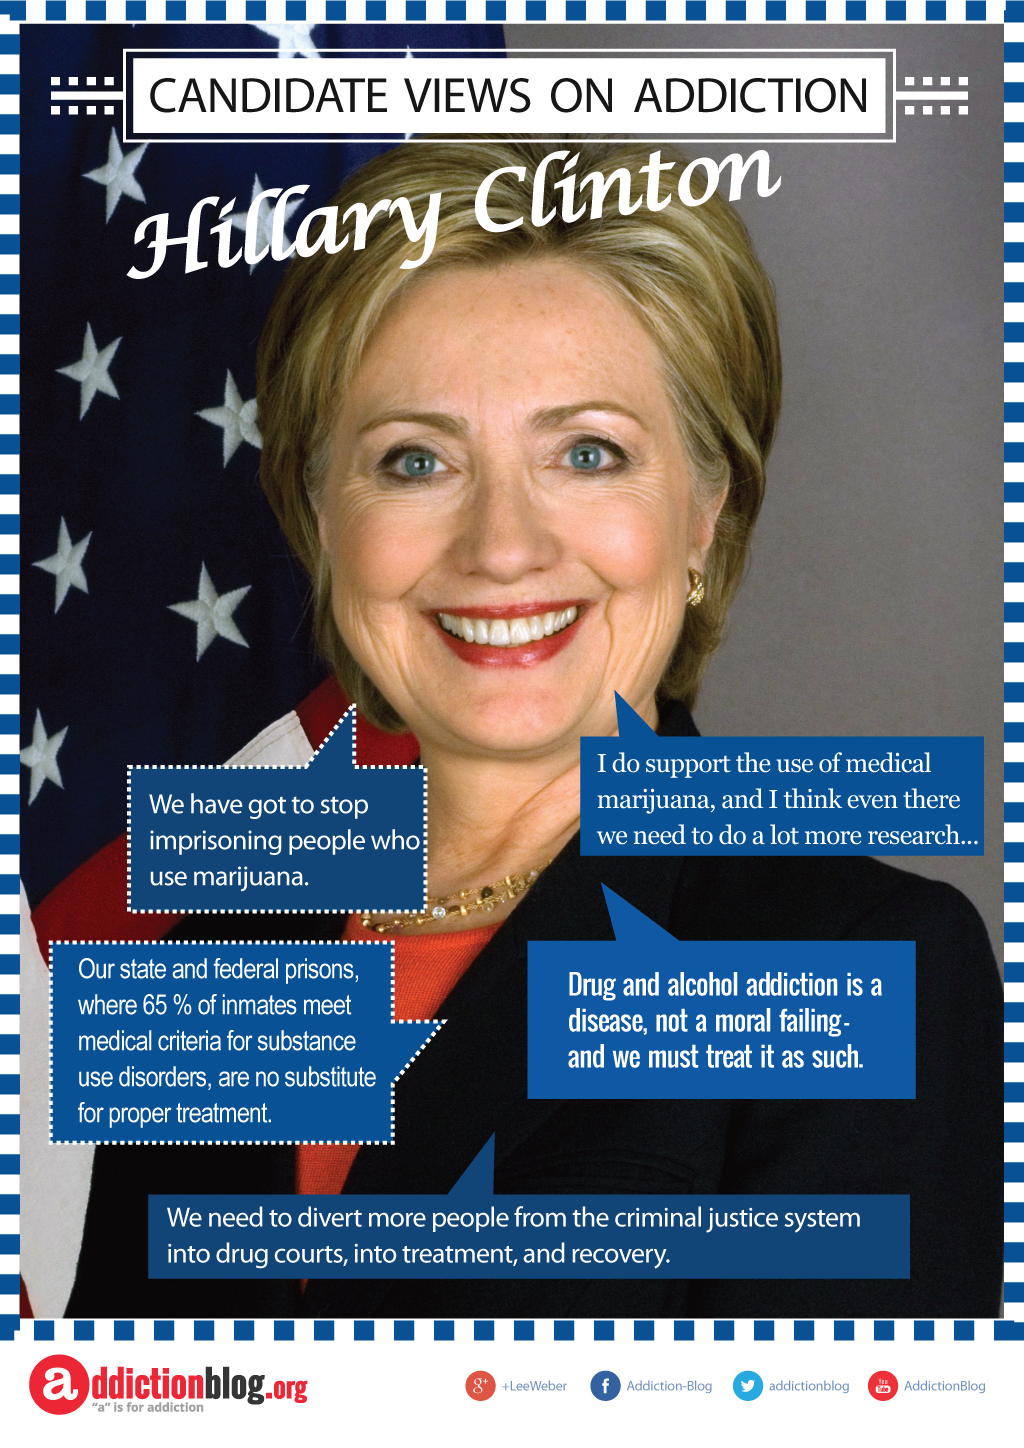 Hillary Clinton’s opinions on legalization and the criminal justice system (INFOGRAPHIC)